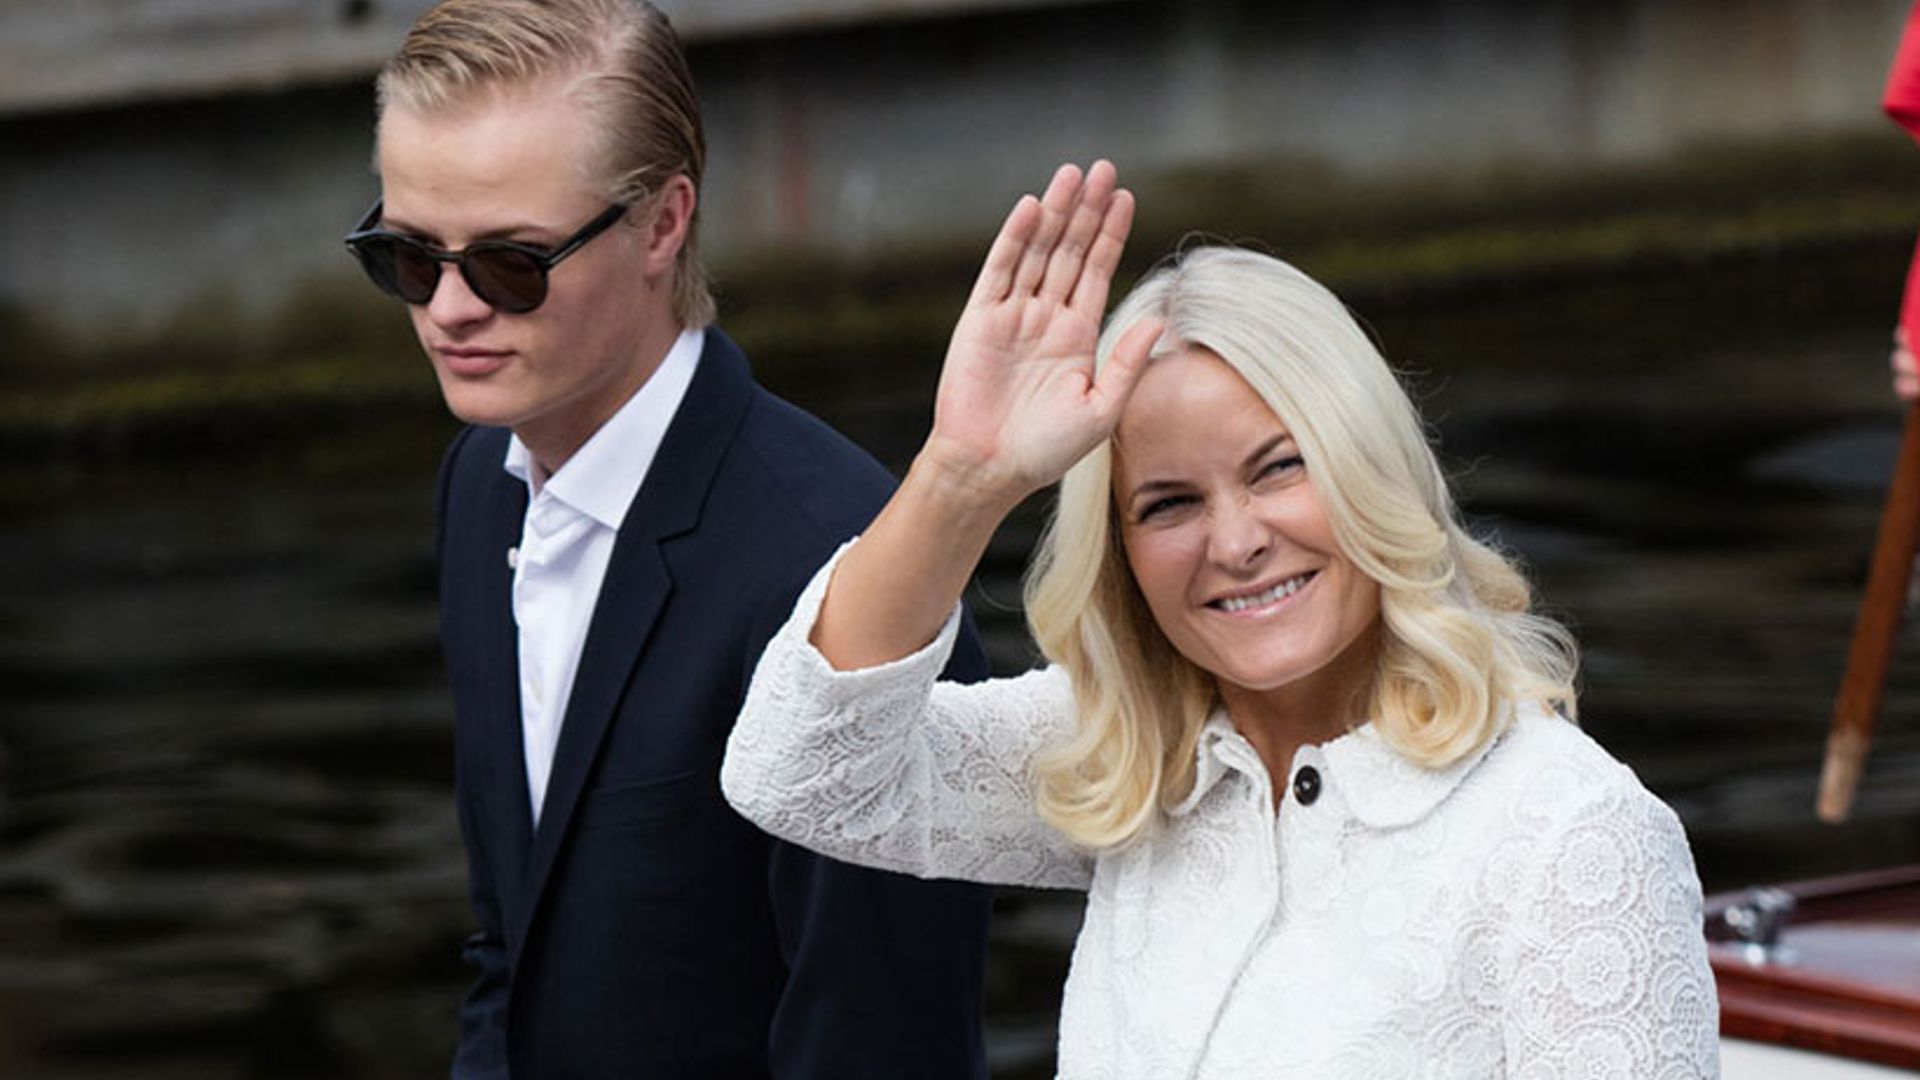 Norwegian royals address Marius Borg Høiby's relationship with former Playboy model